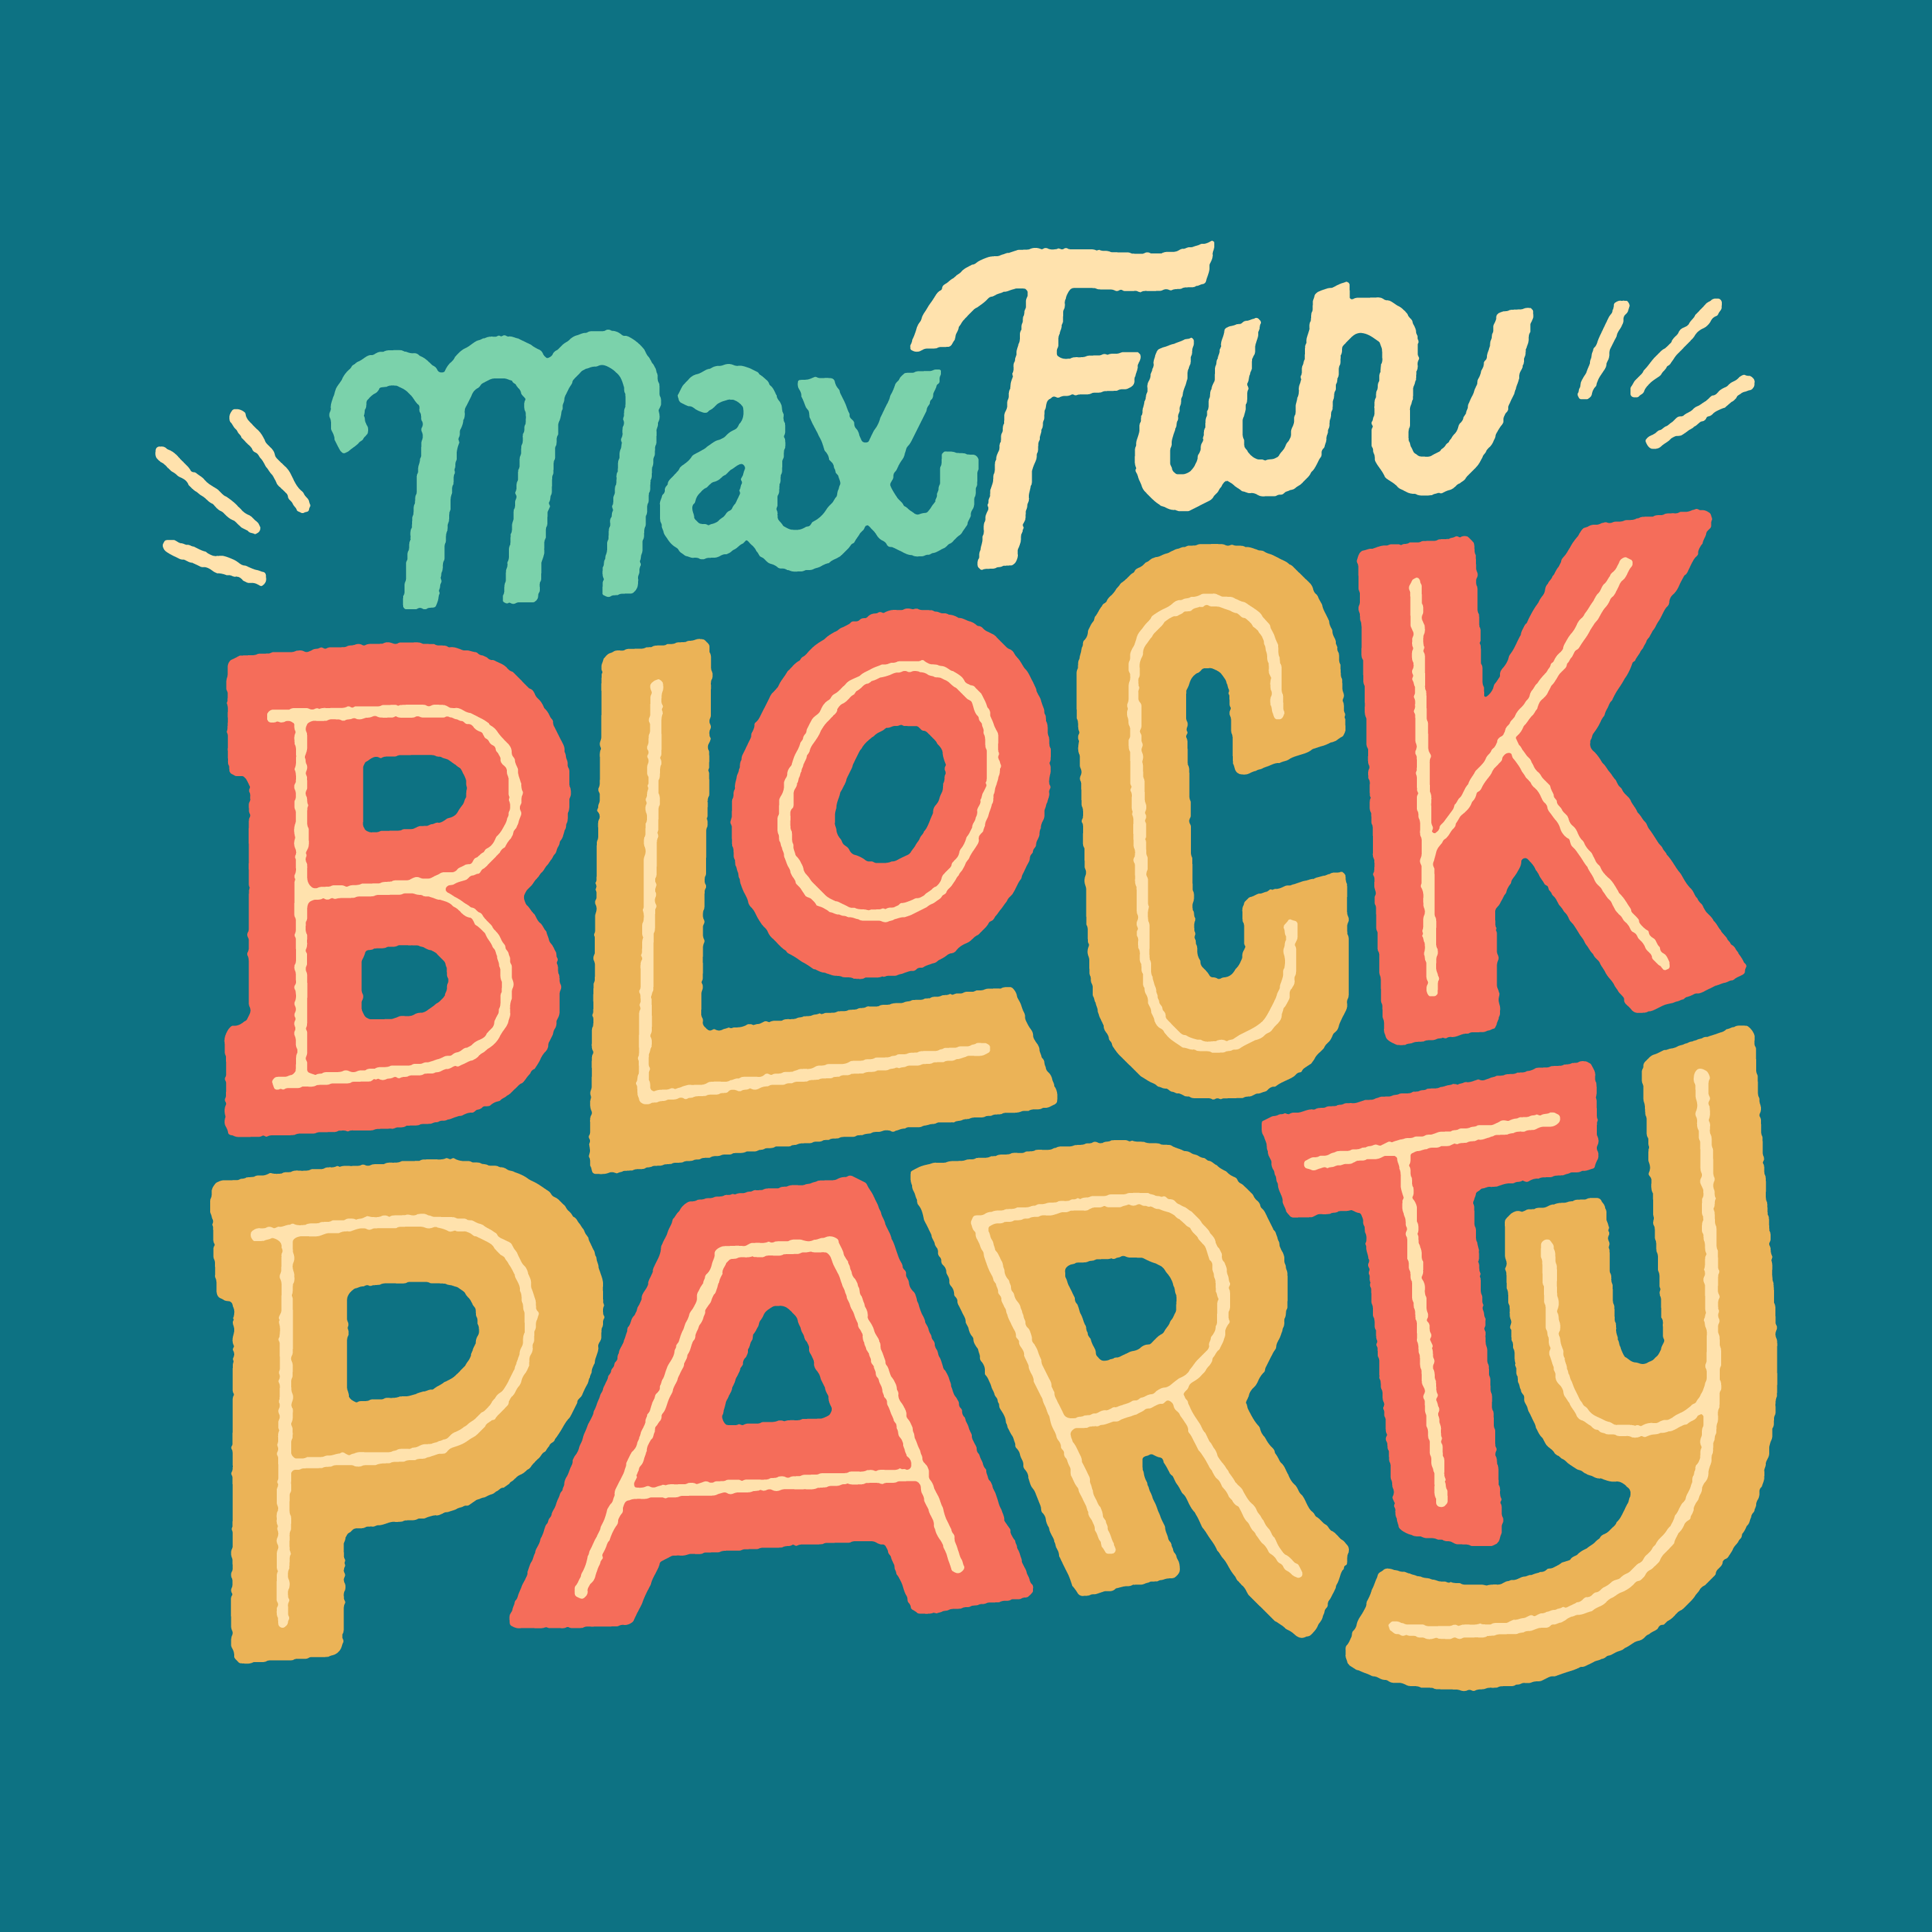 A colorful retro logo that says MaxFun in blue and light yellow and beneath that, Block Party in yellow and orange,